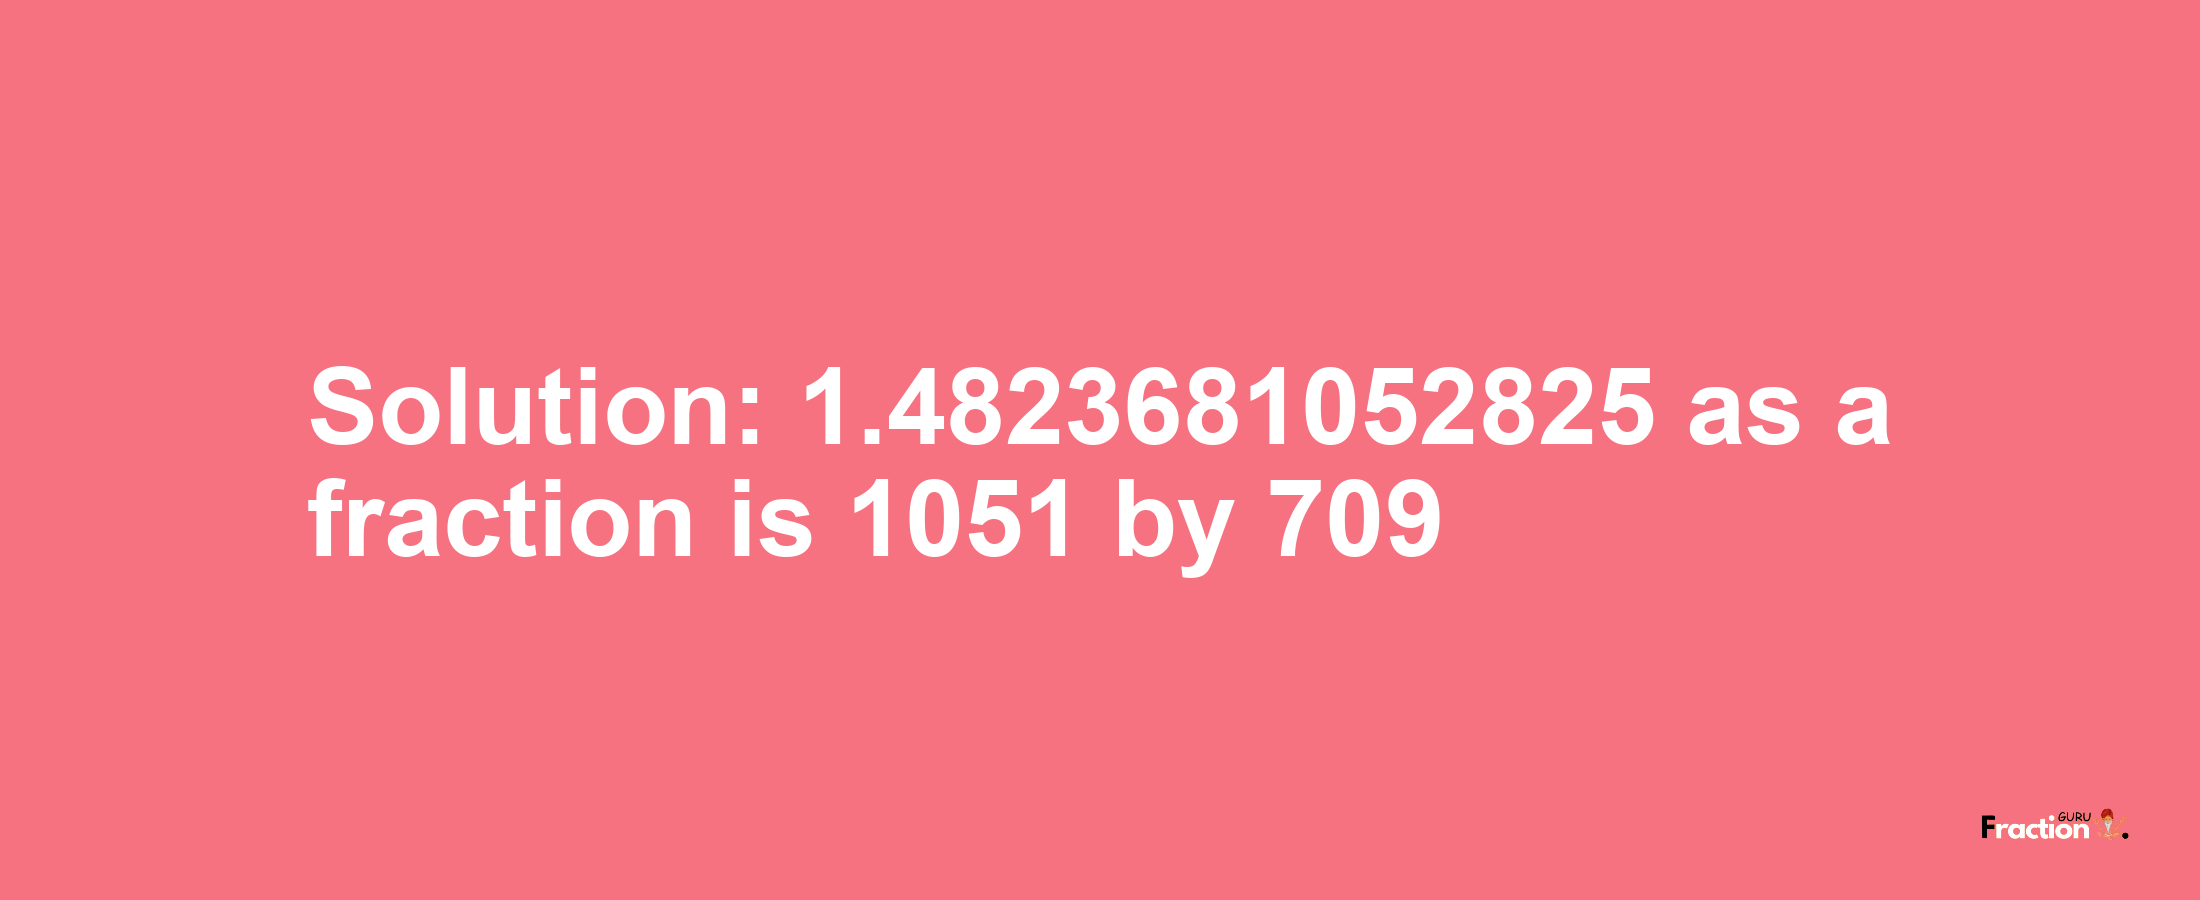 Solution:1.4823681052825 as a fraction is 1051/709